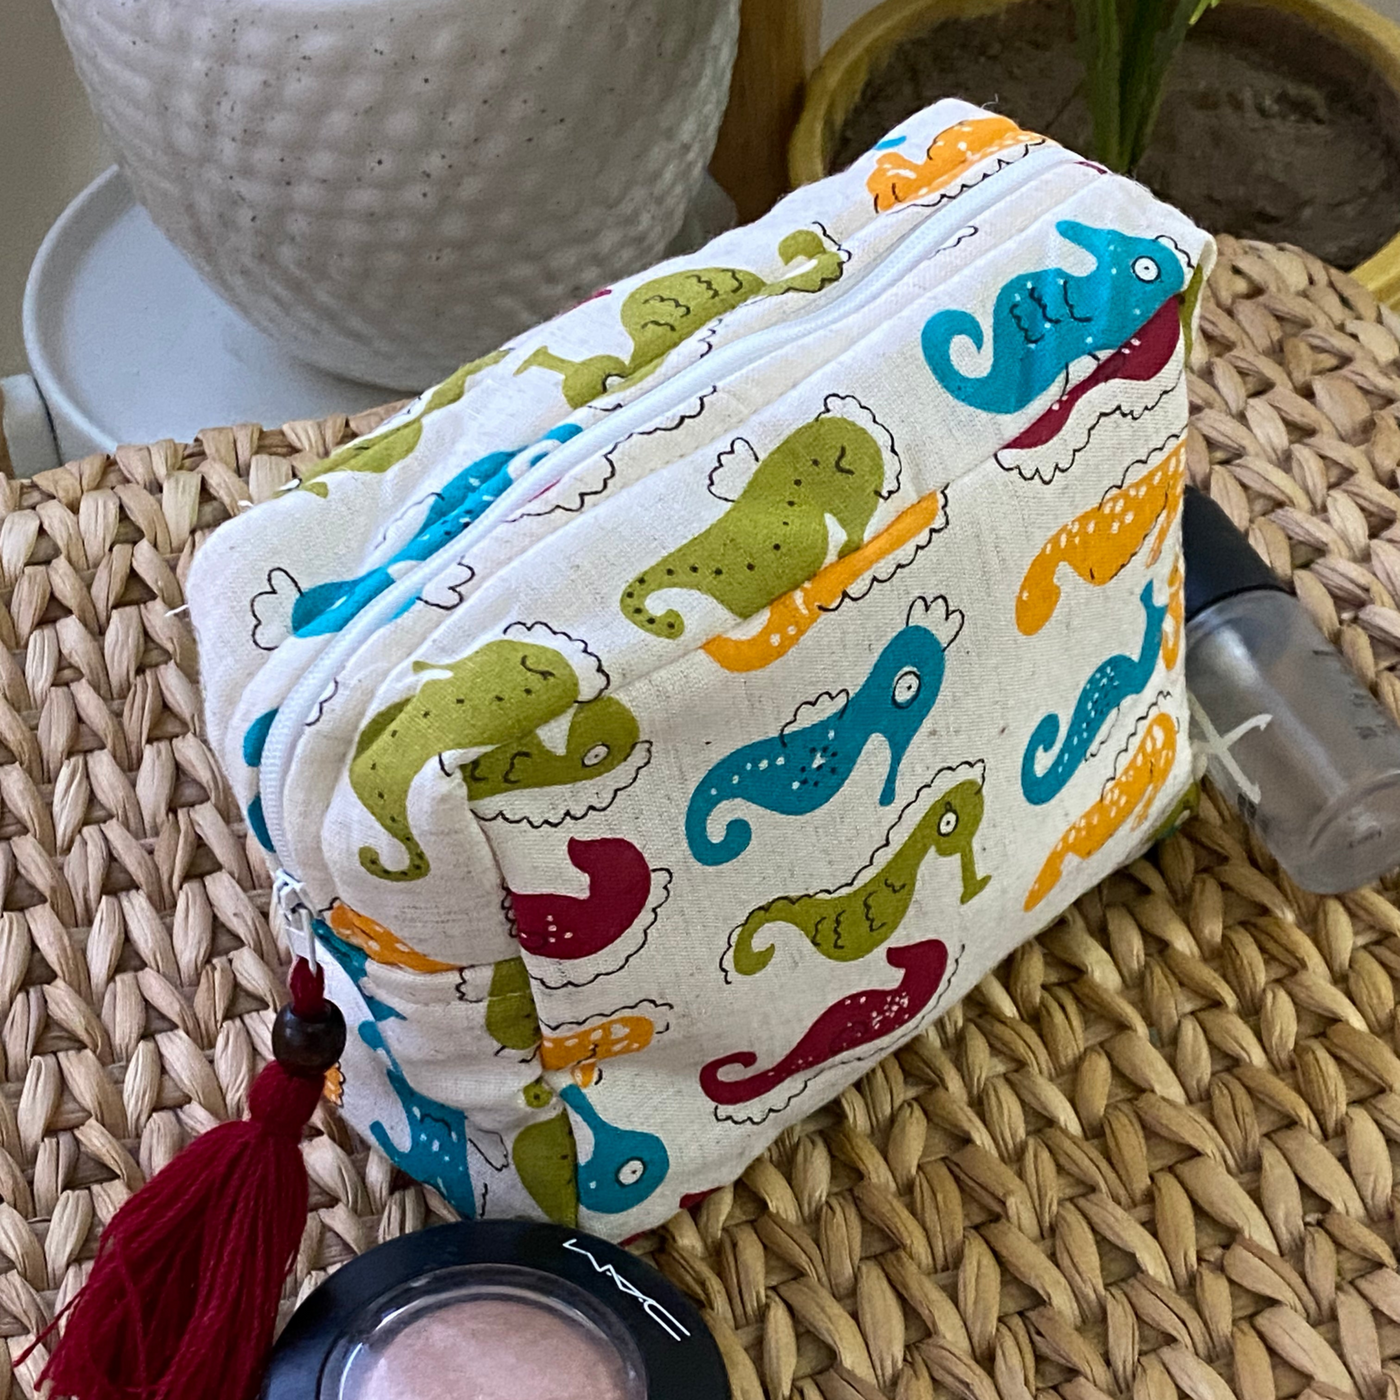 Effortless Organization: Cotton Fabric Pouch for All Your Needs